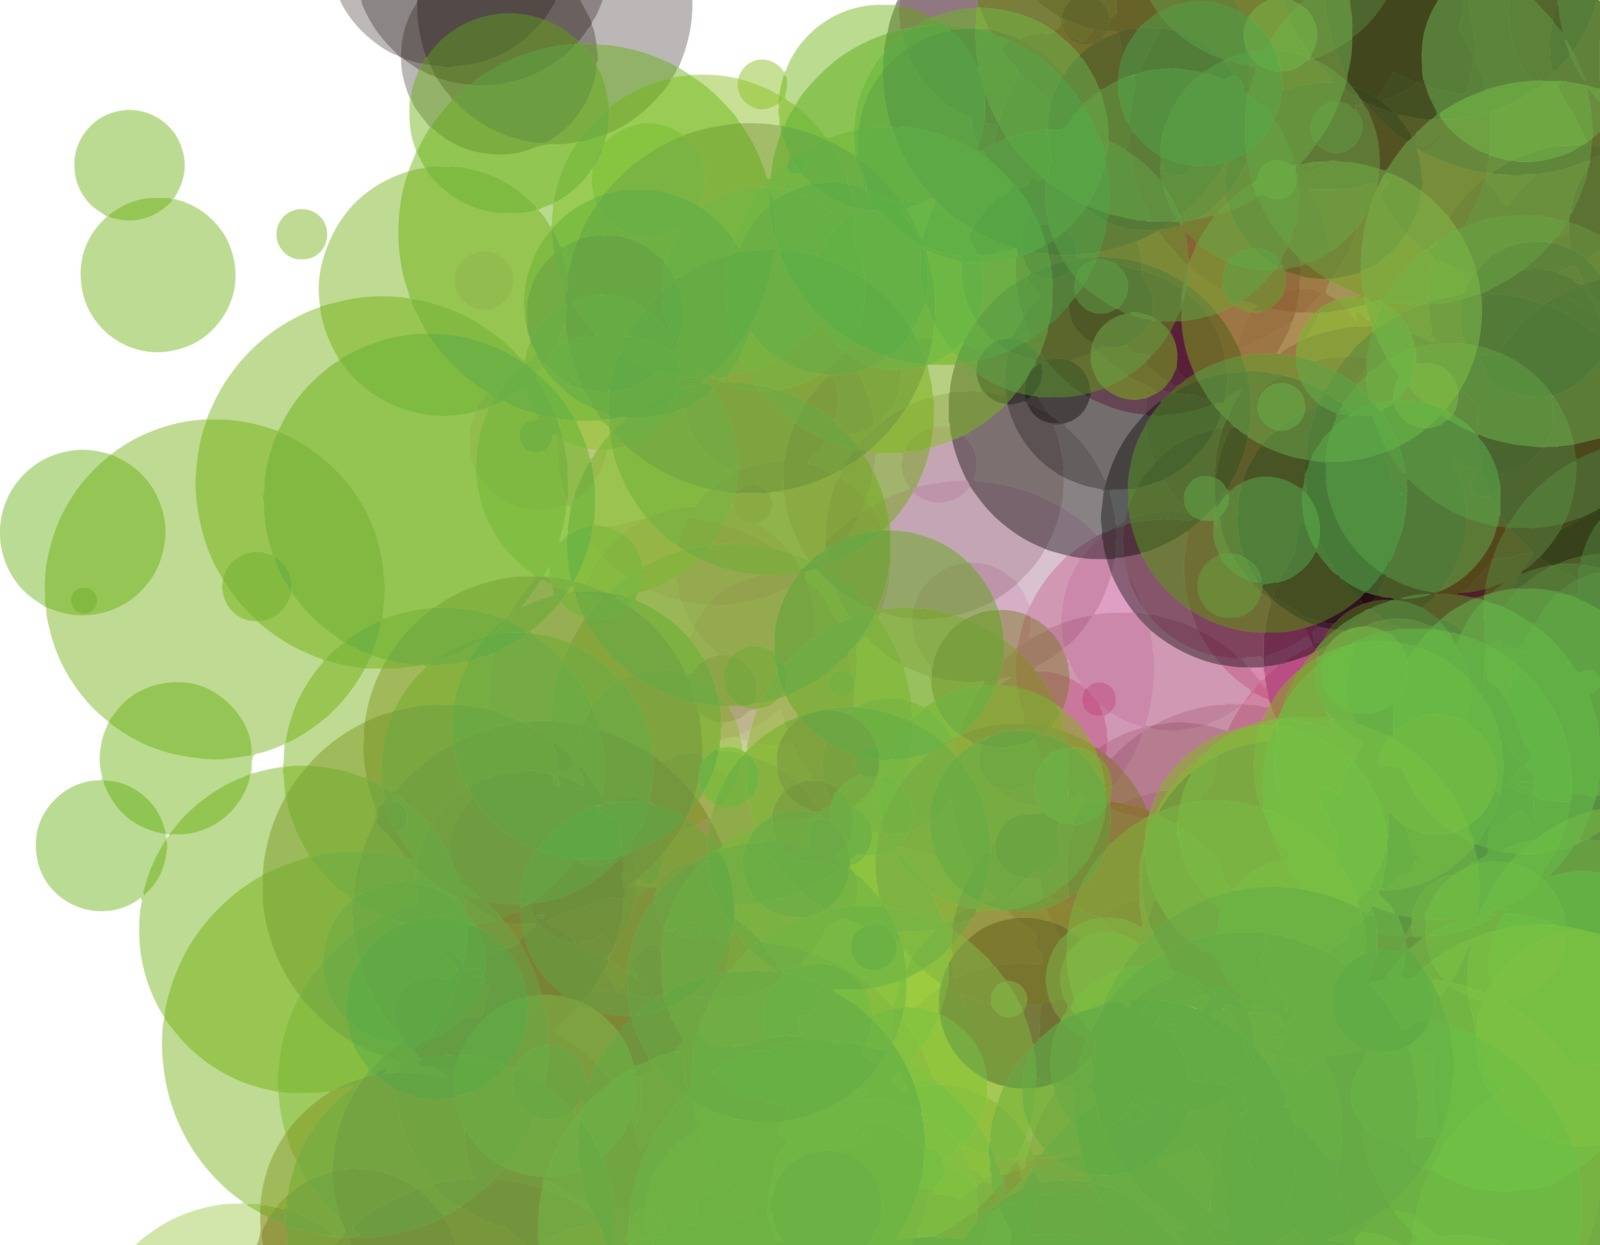 Green and pink bubbles, grunge background vector. Ink splatter, blots, spot elements. Watercolor paint splashes pattern, fluid stains spots background.